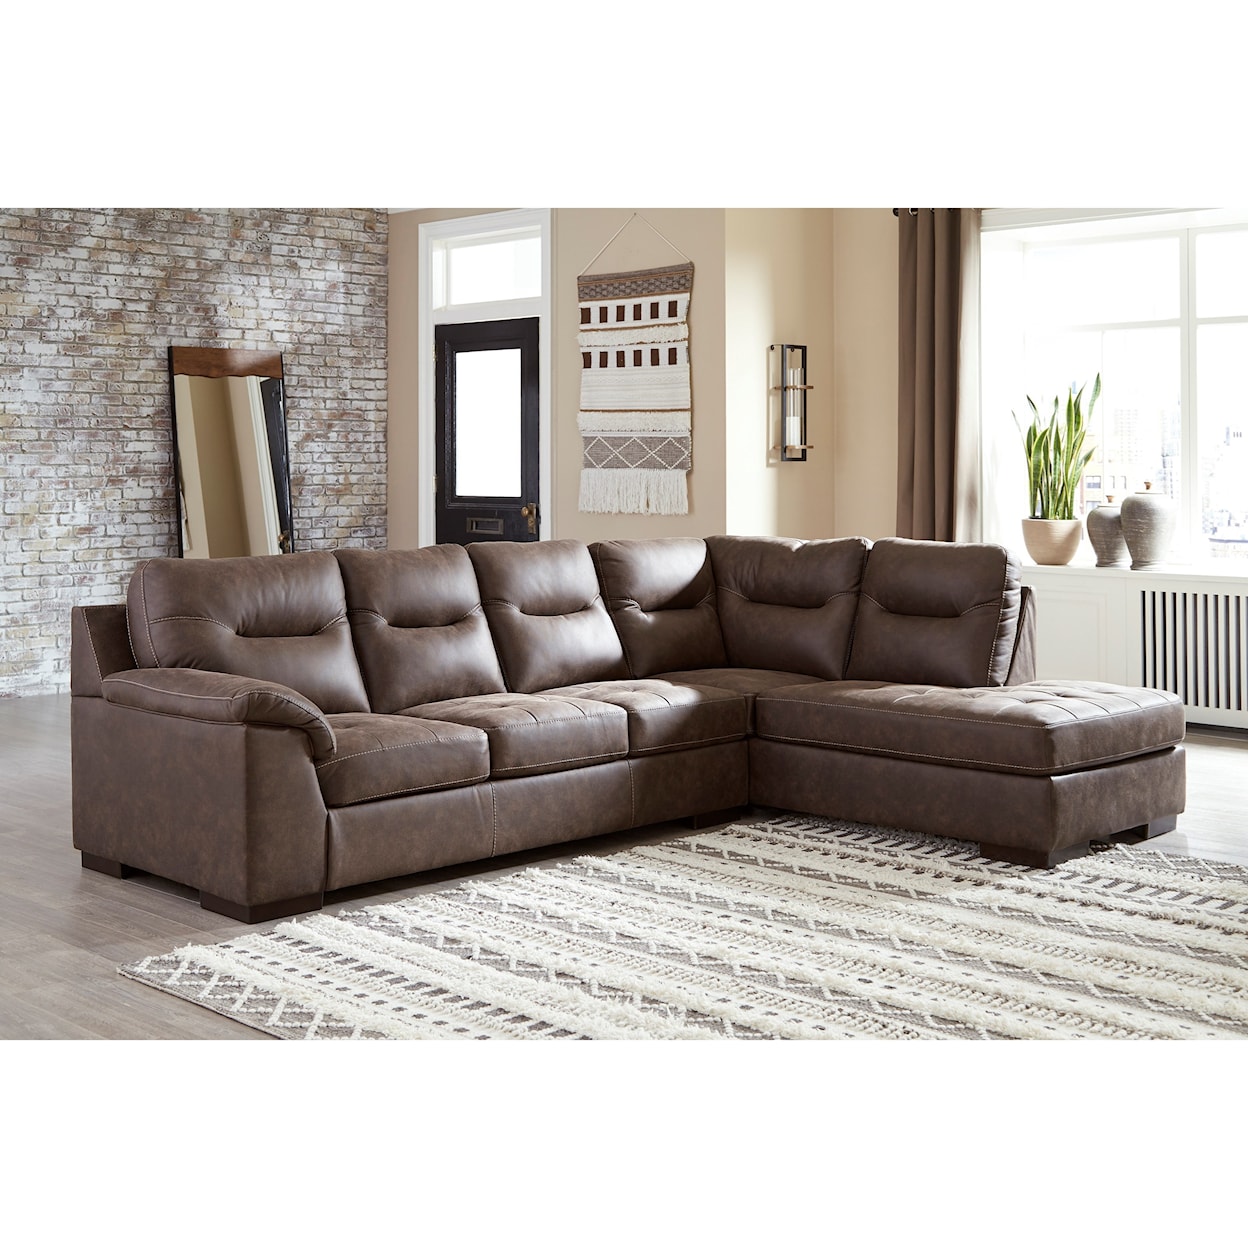 Signature Design by Ashley Maderla 2-Piece Sectional with Right Chaise